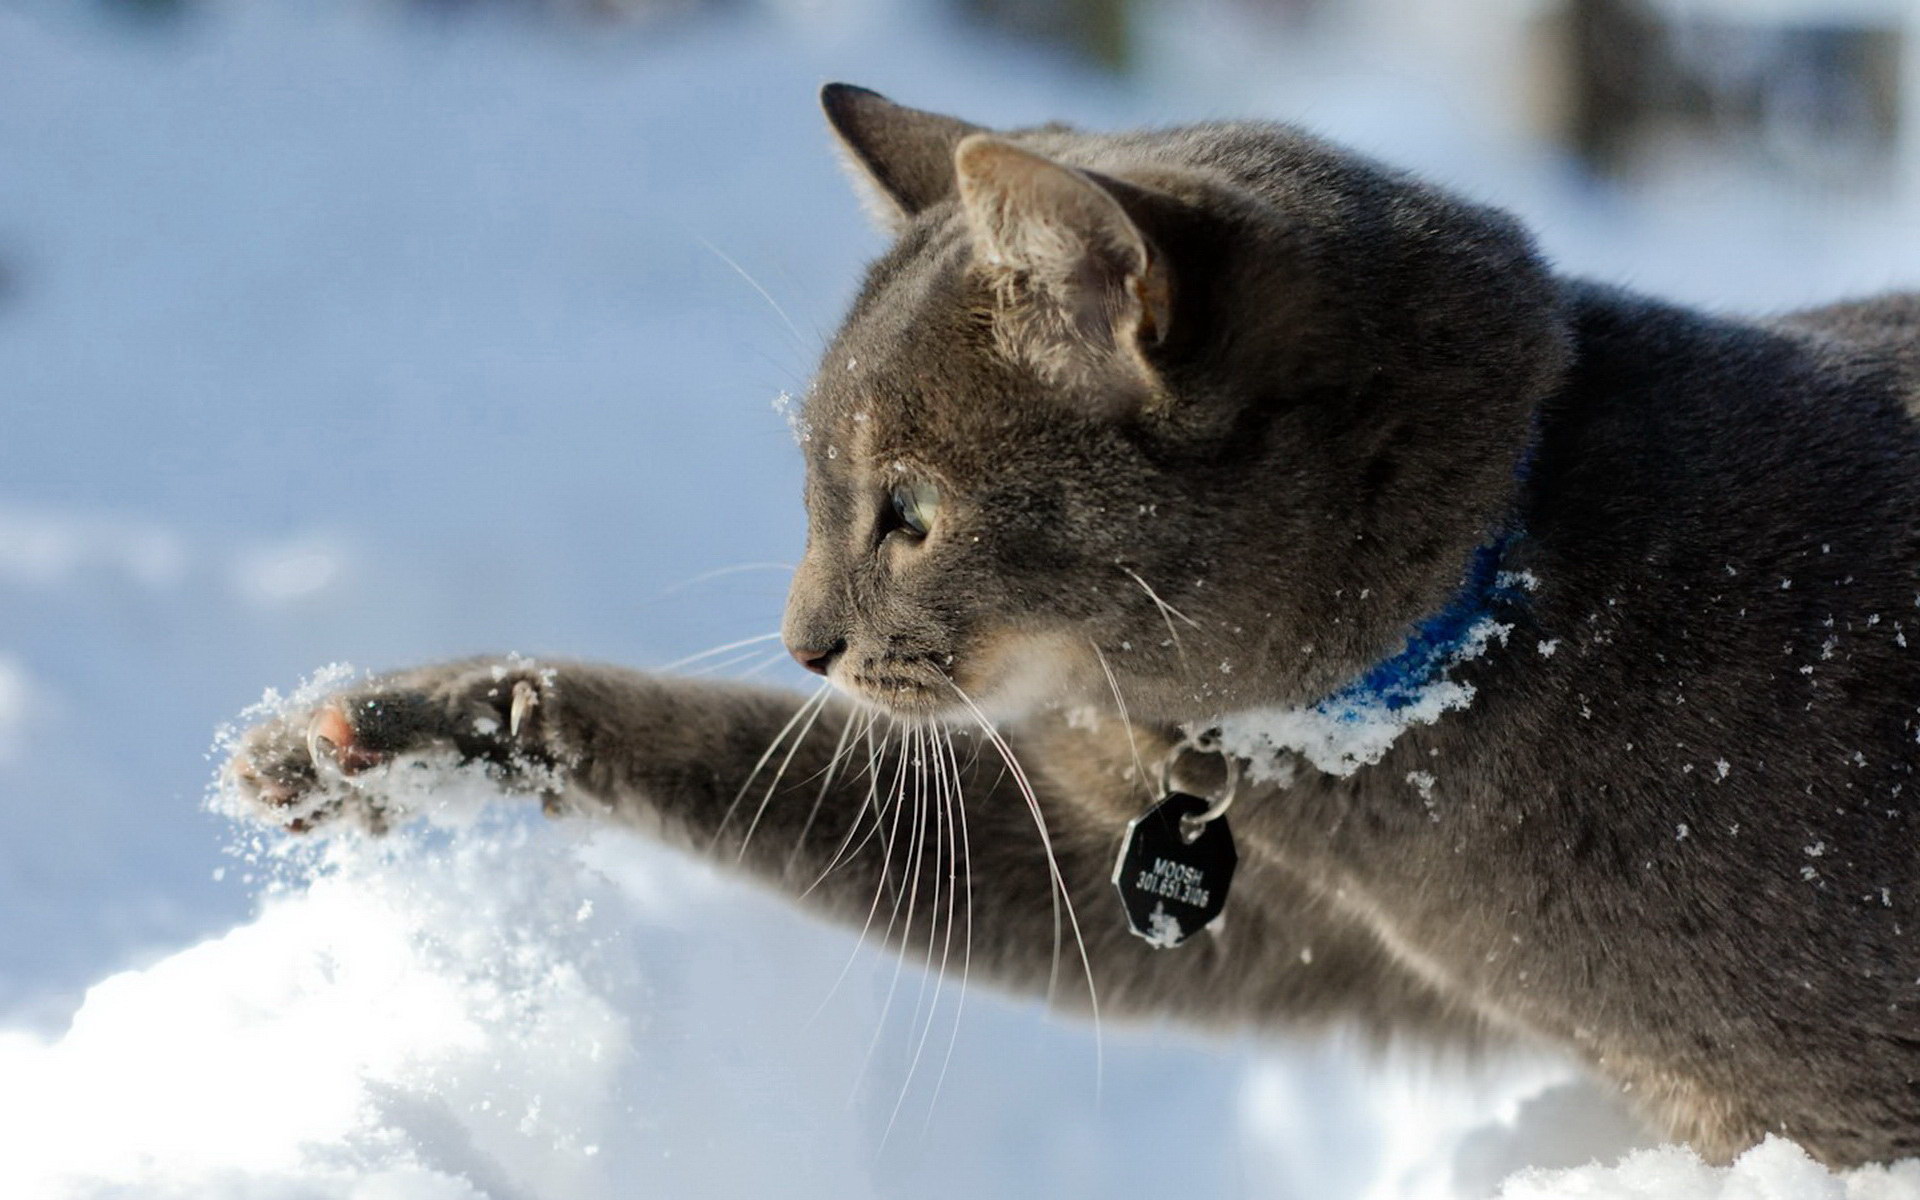 hd cat snow winter mood hd resolution wallpaper Car Pictures